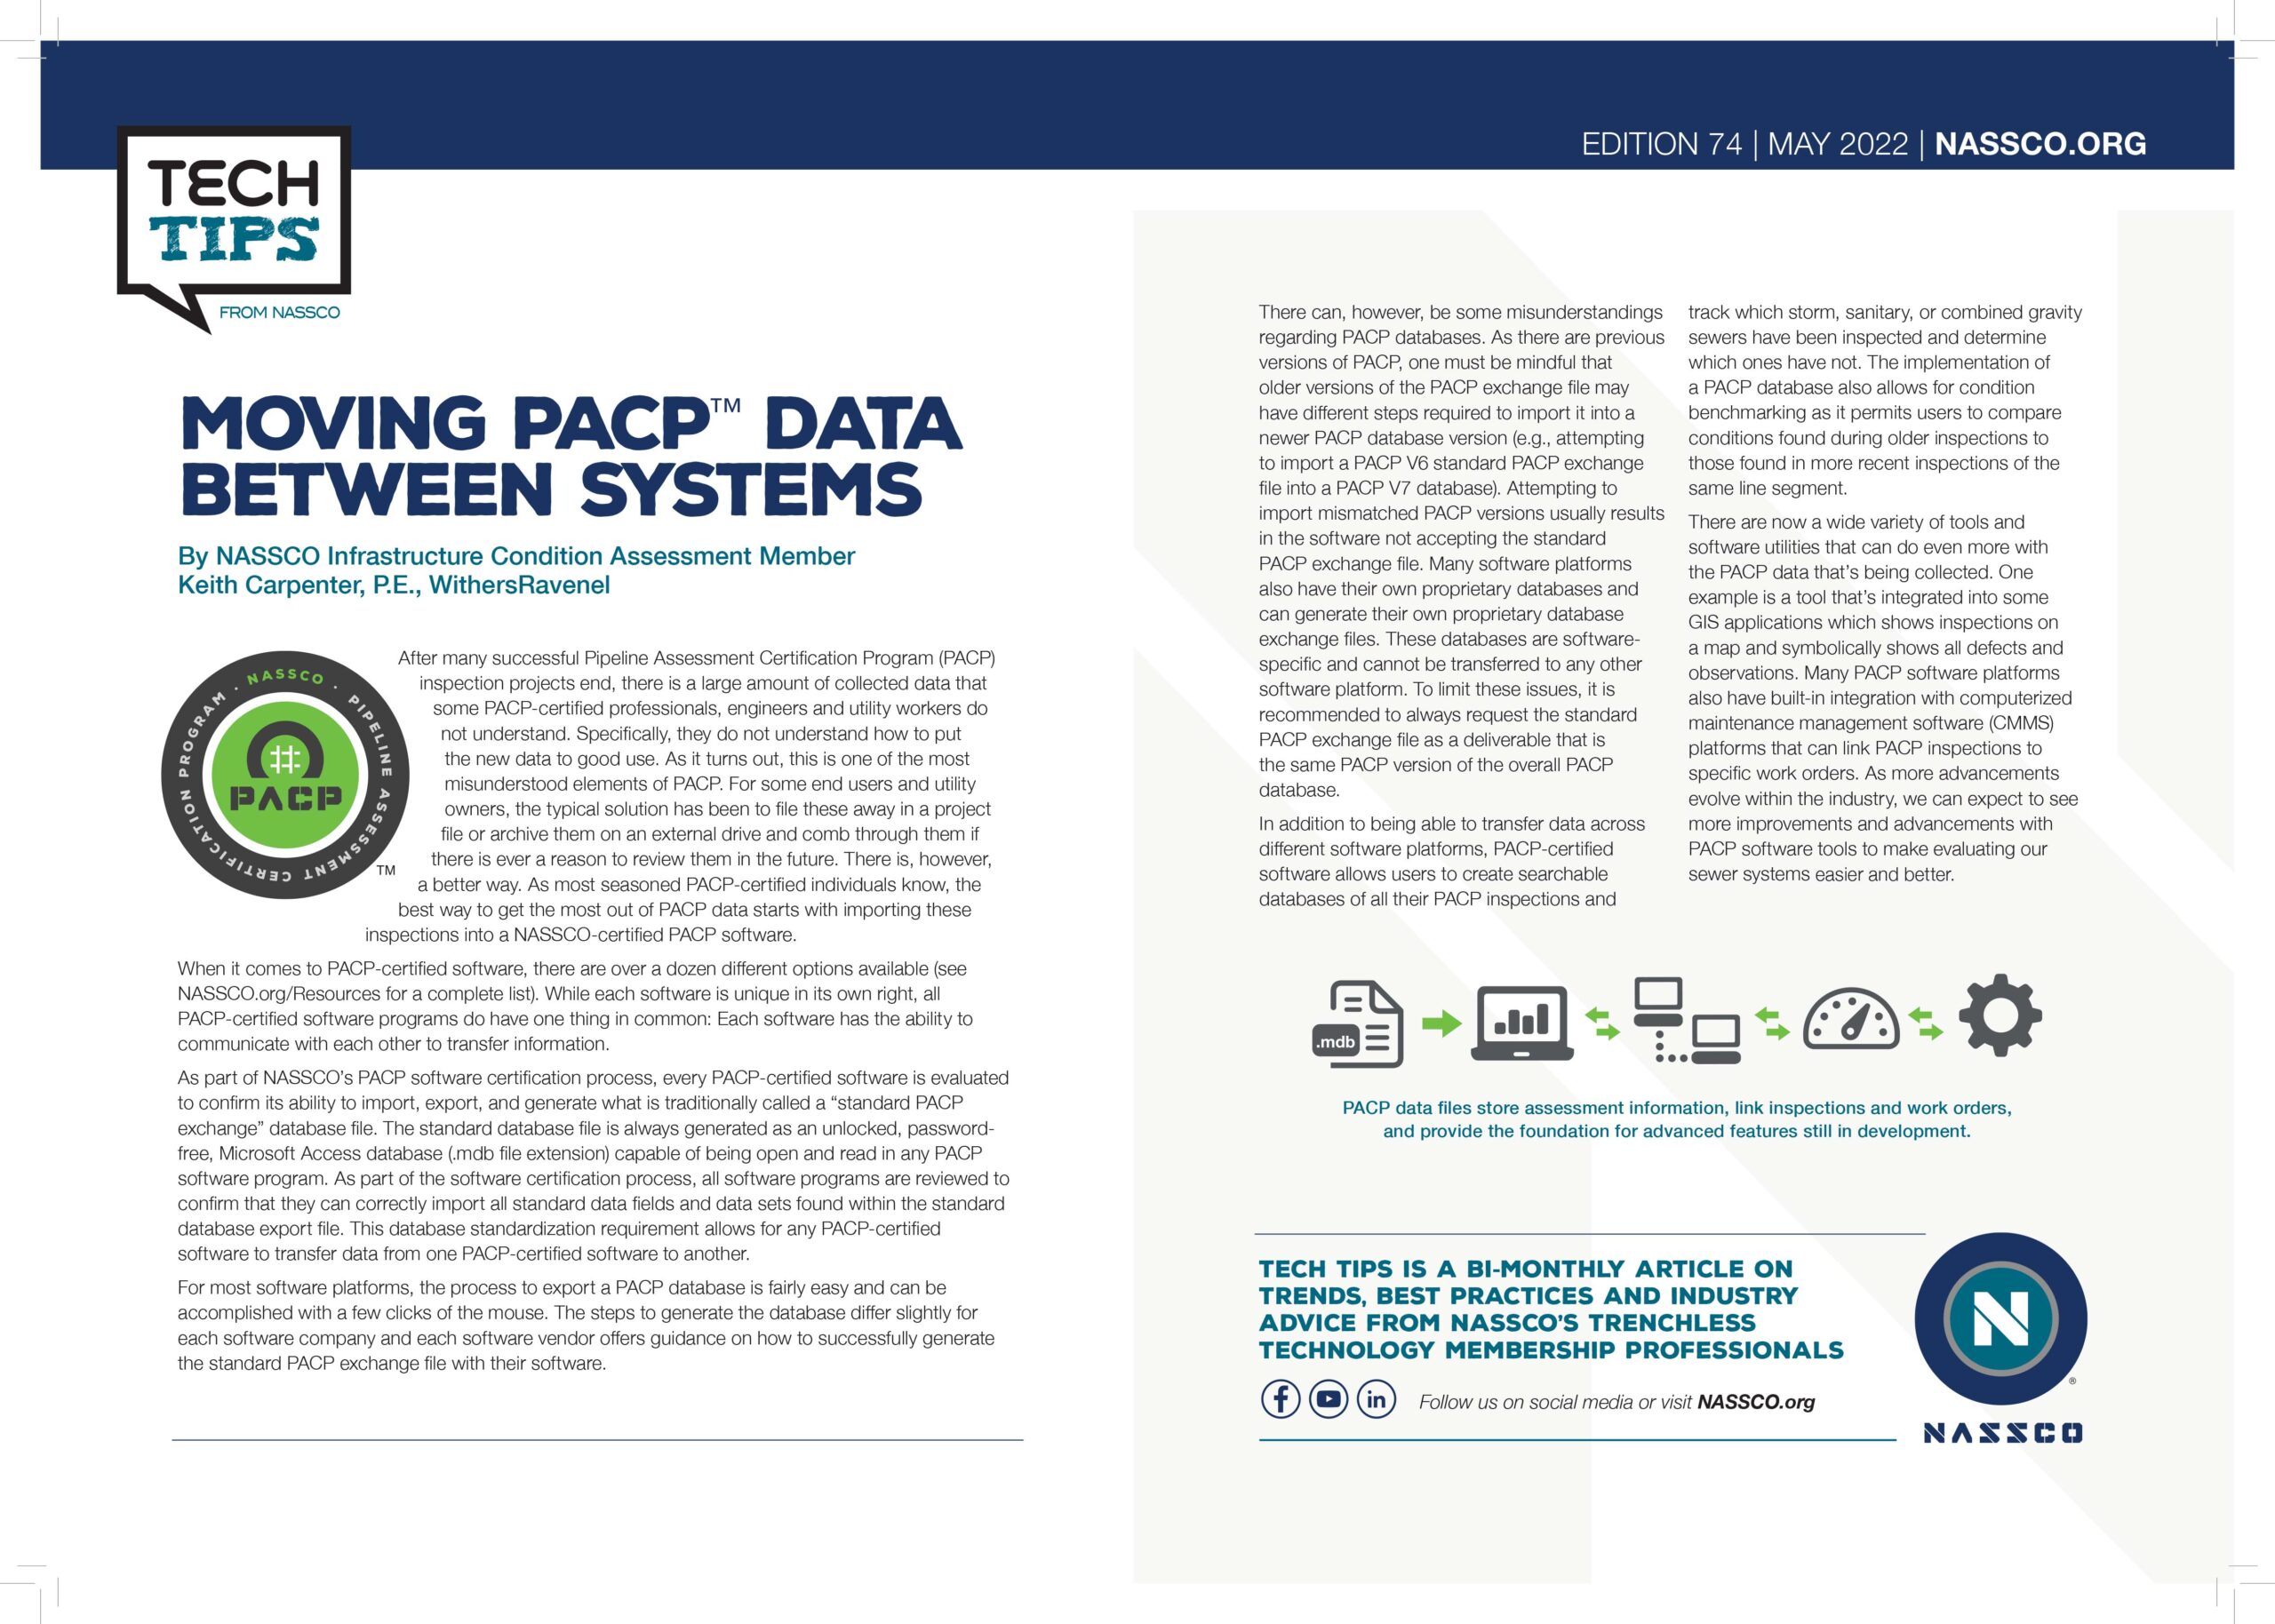 MOVING PACP™ DATA BETWEEN SYSTEMS